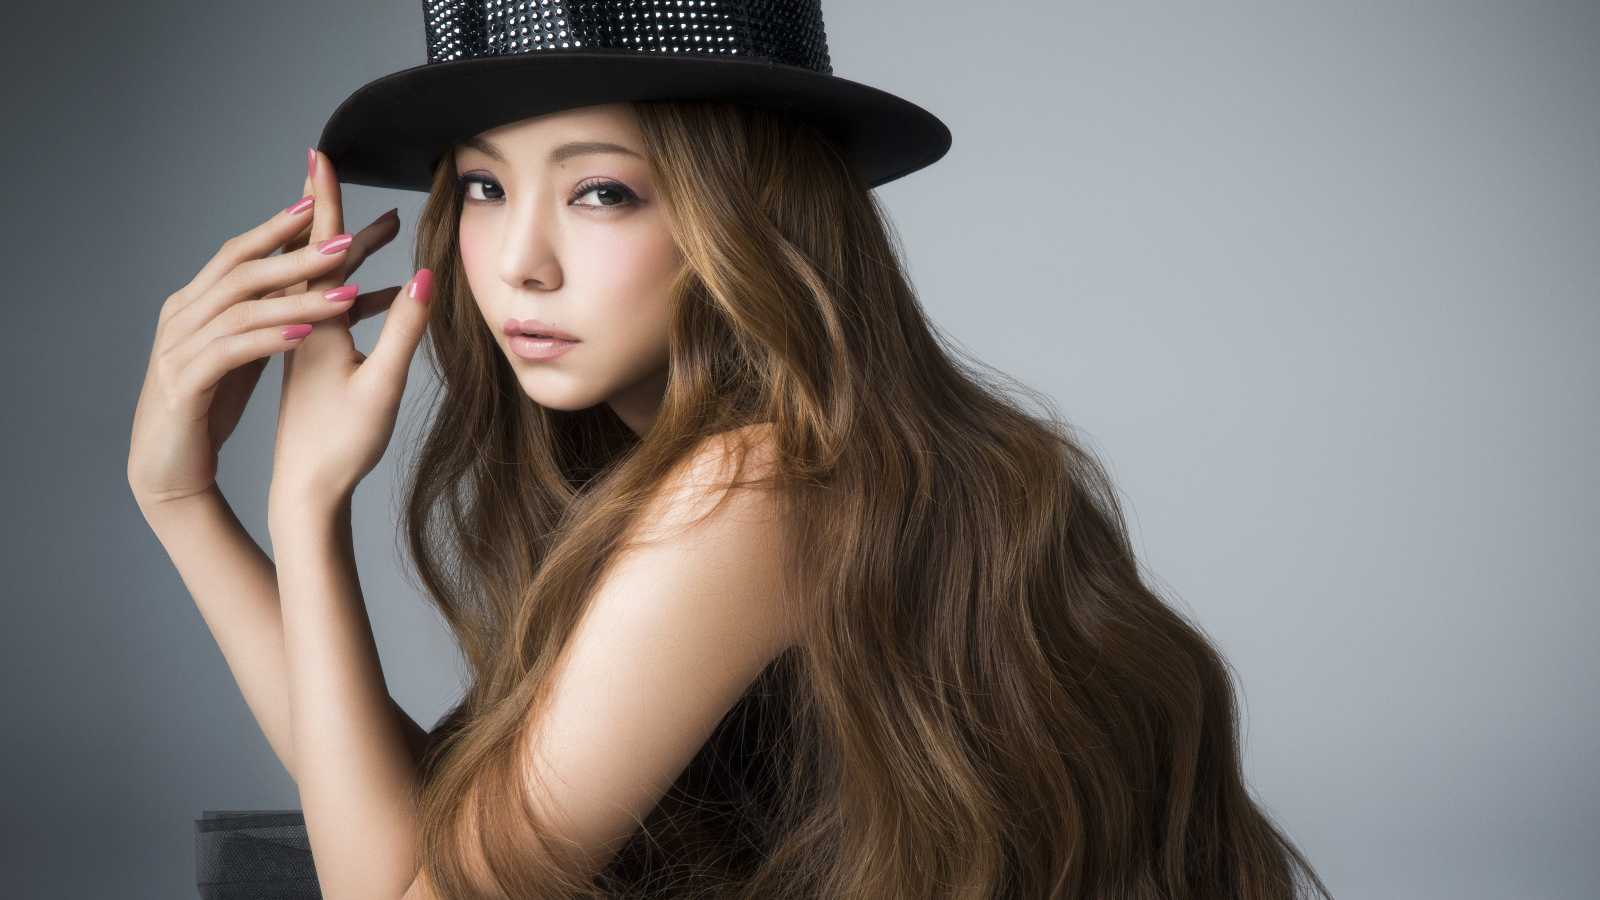 New Live DVD from Amuro Namie © 2015 Dimension Point All rights reserved.